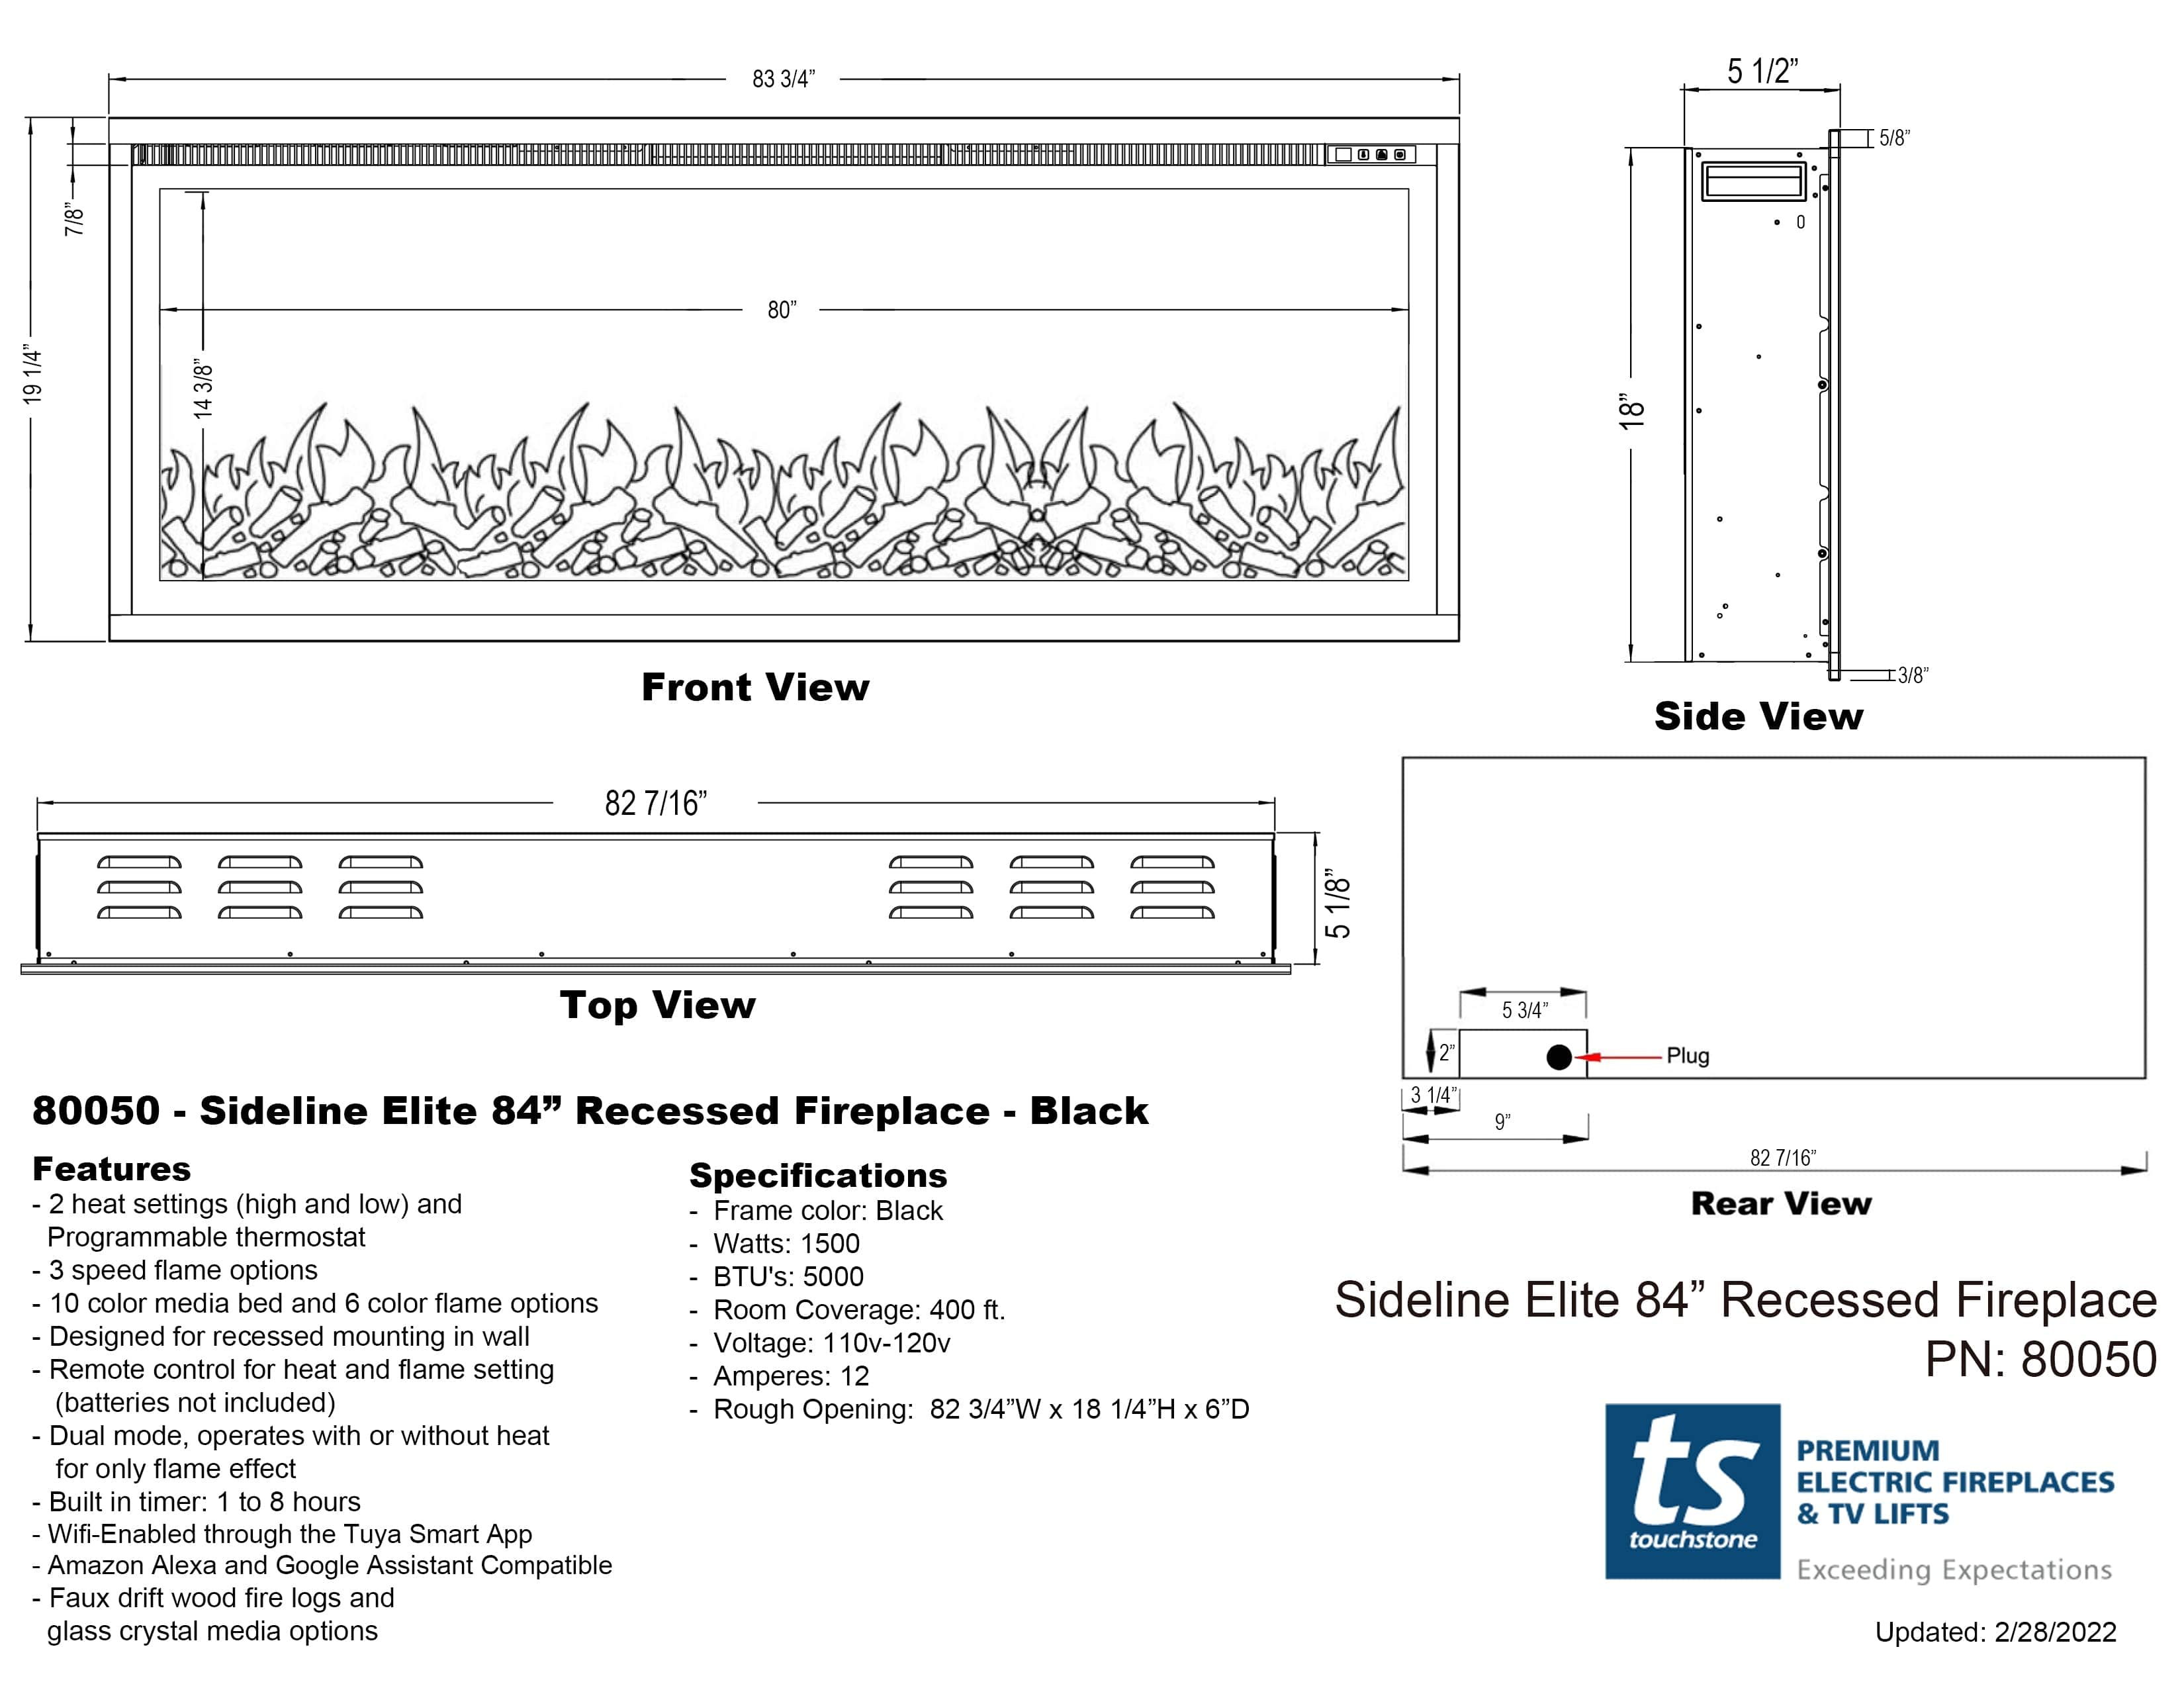 Sideline Elite Smart 80050 84 WiFi-Enabled Recessed Electric Fireplace specifications.